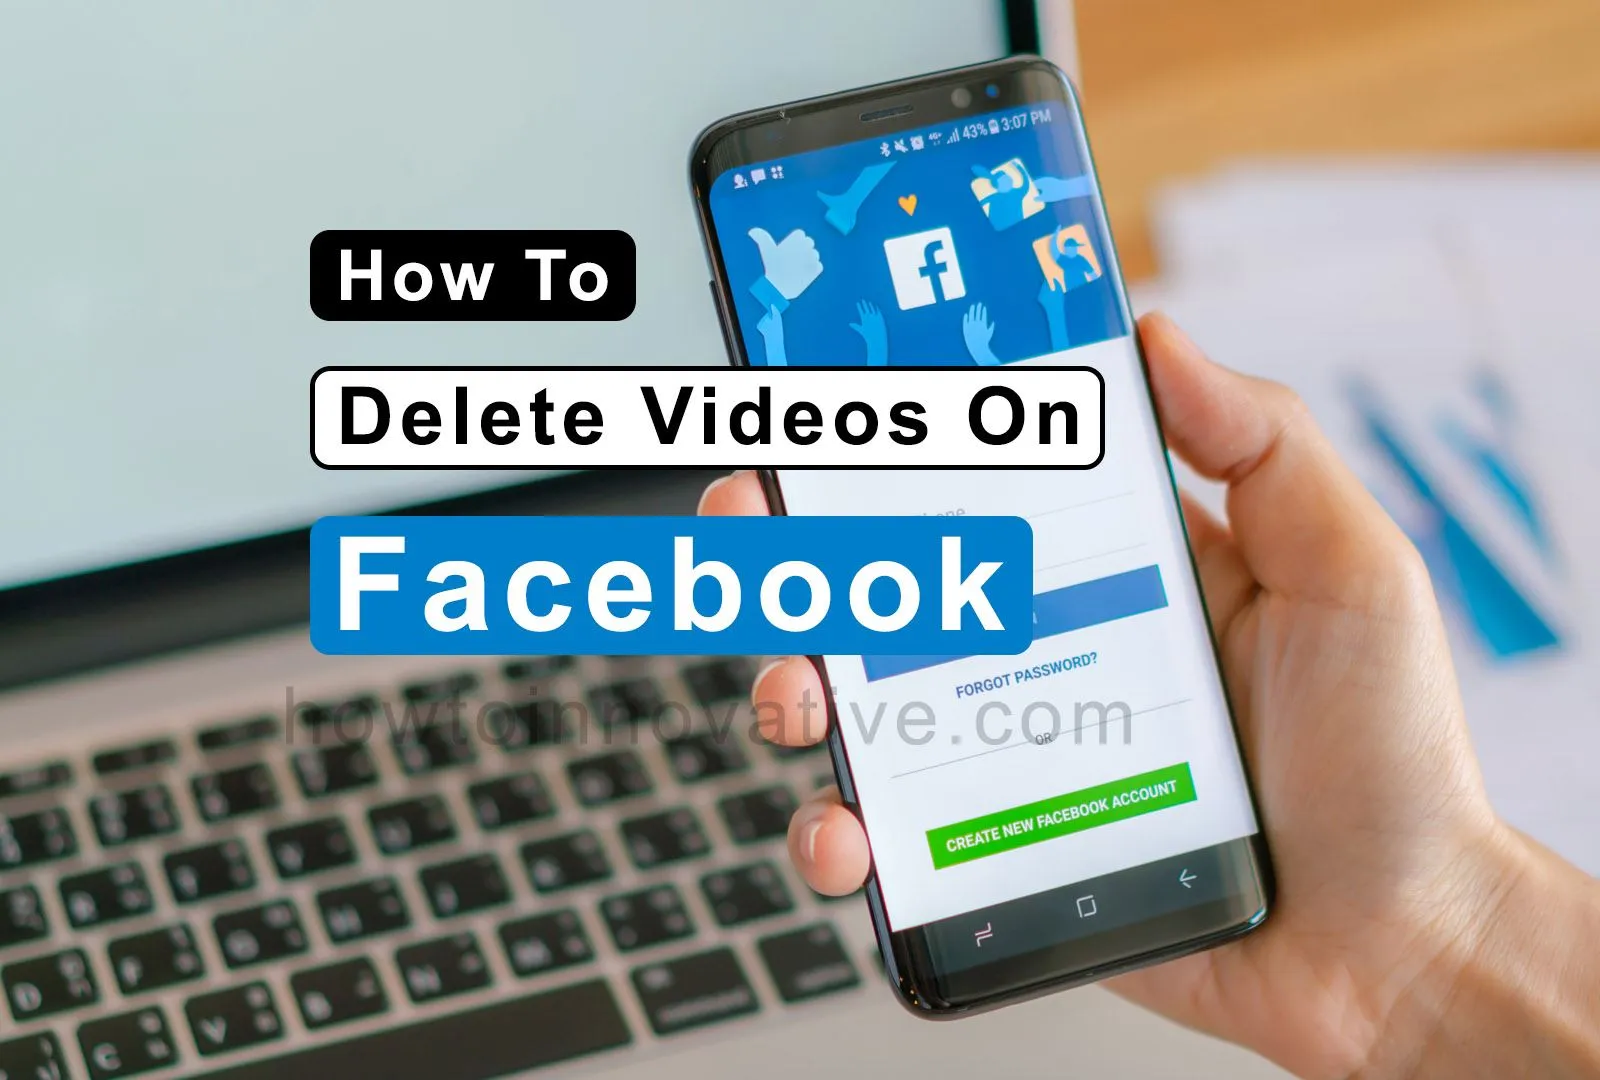 How To Delete Videos On Facebook - How-to-Innovative